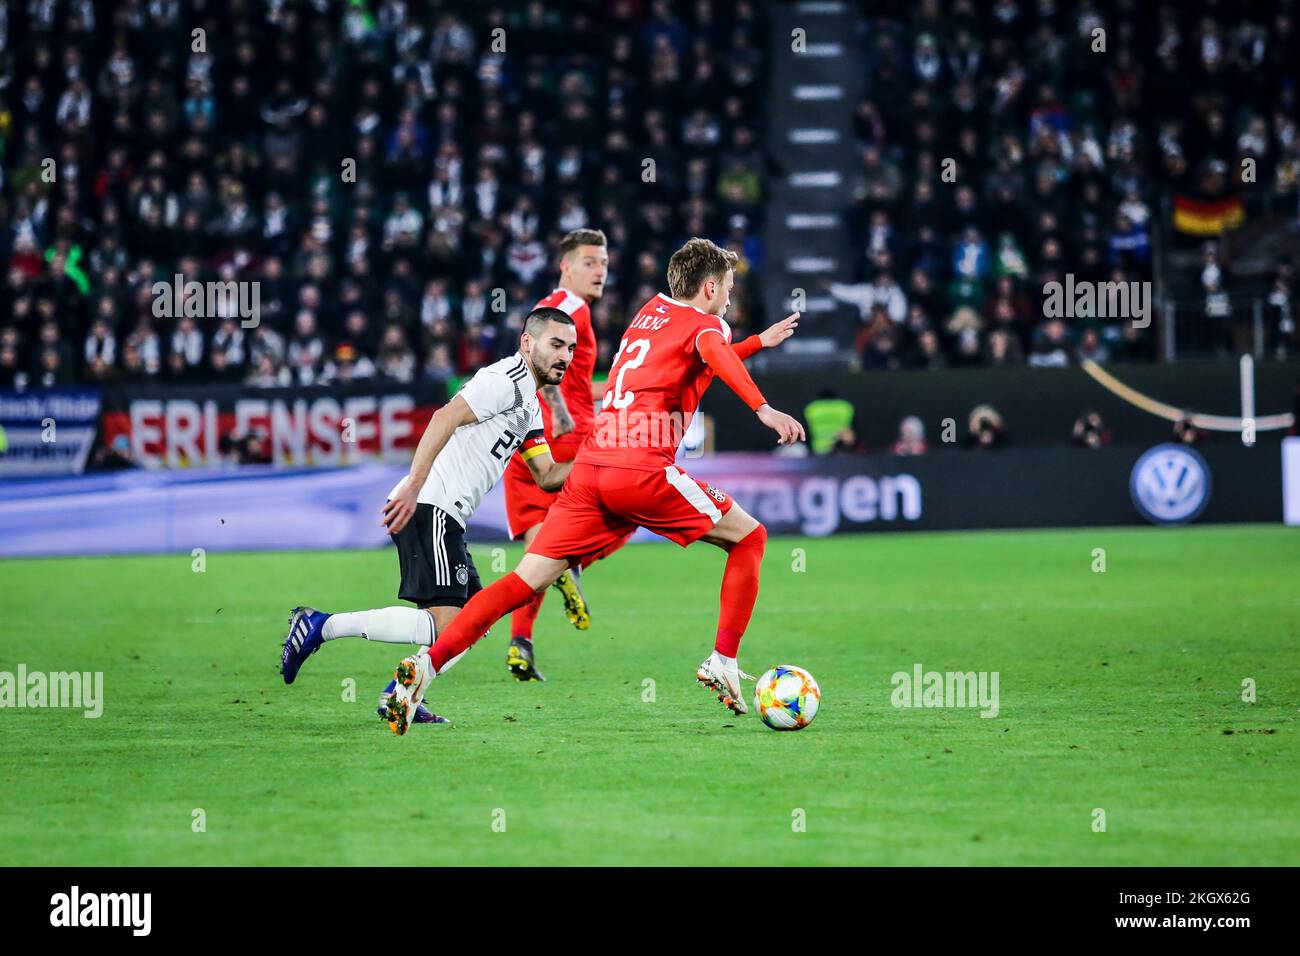 Wolfsburg, Germany, March 20, 2019: Serbian soccer player Adem Ljajic runs with the ball during the international soccer game Germany vs Serbia Stock Photo